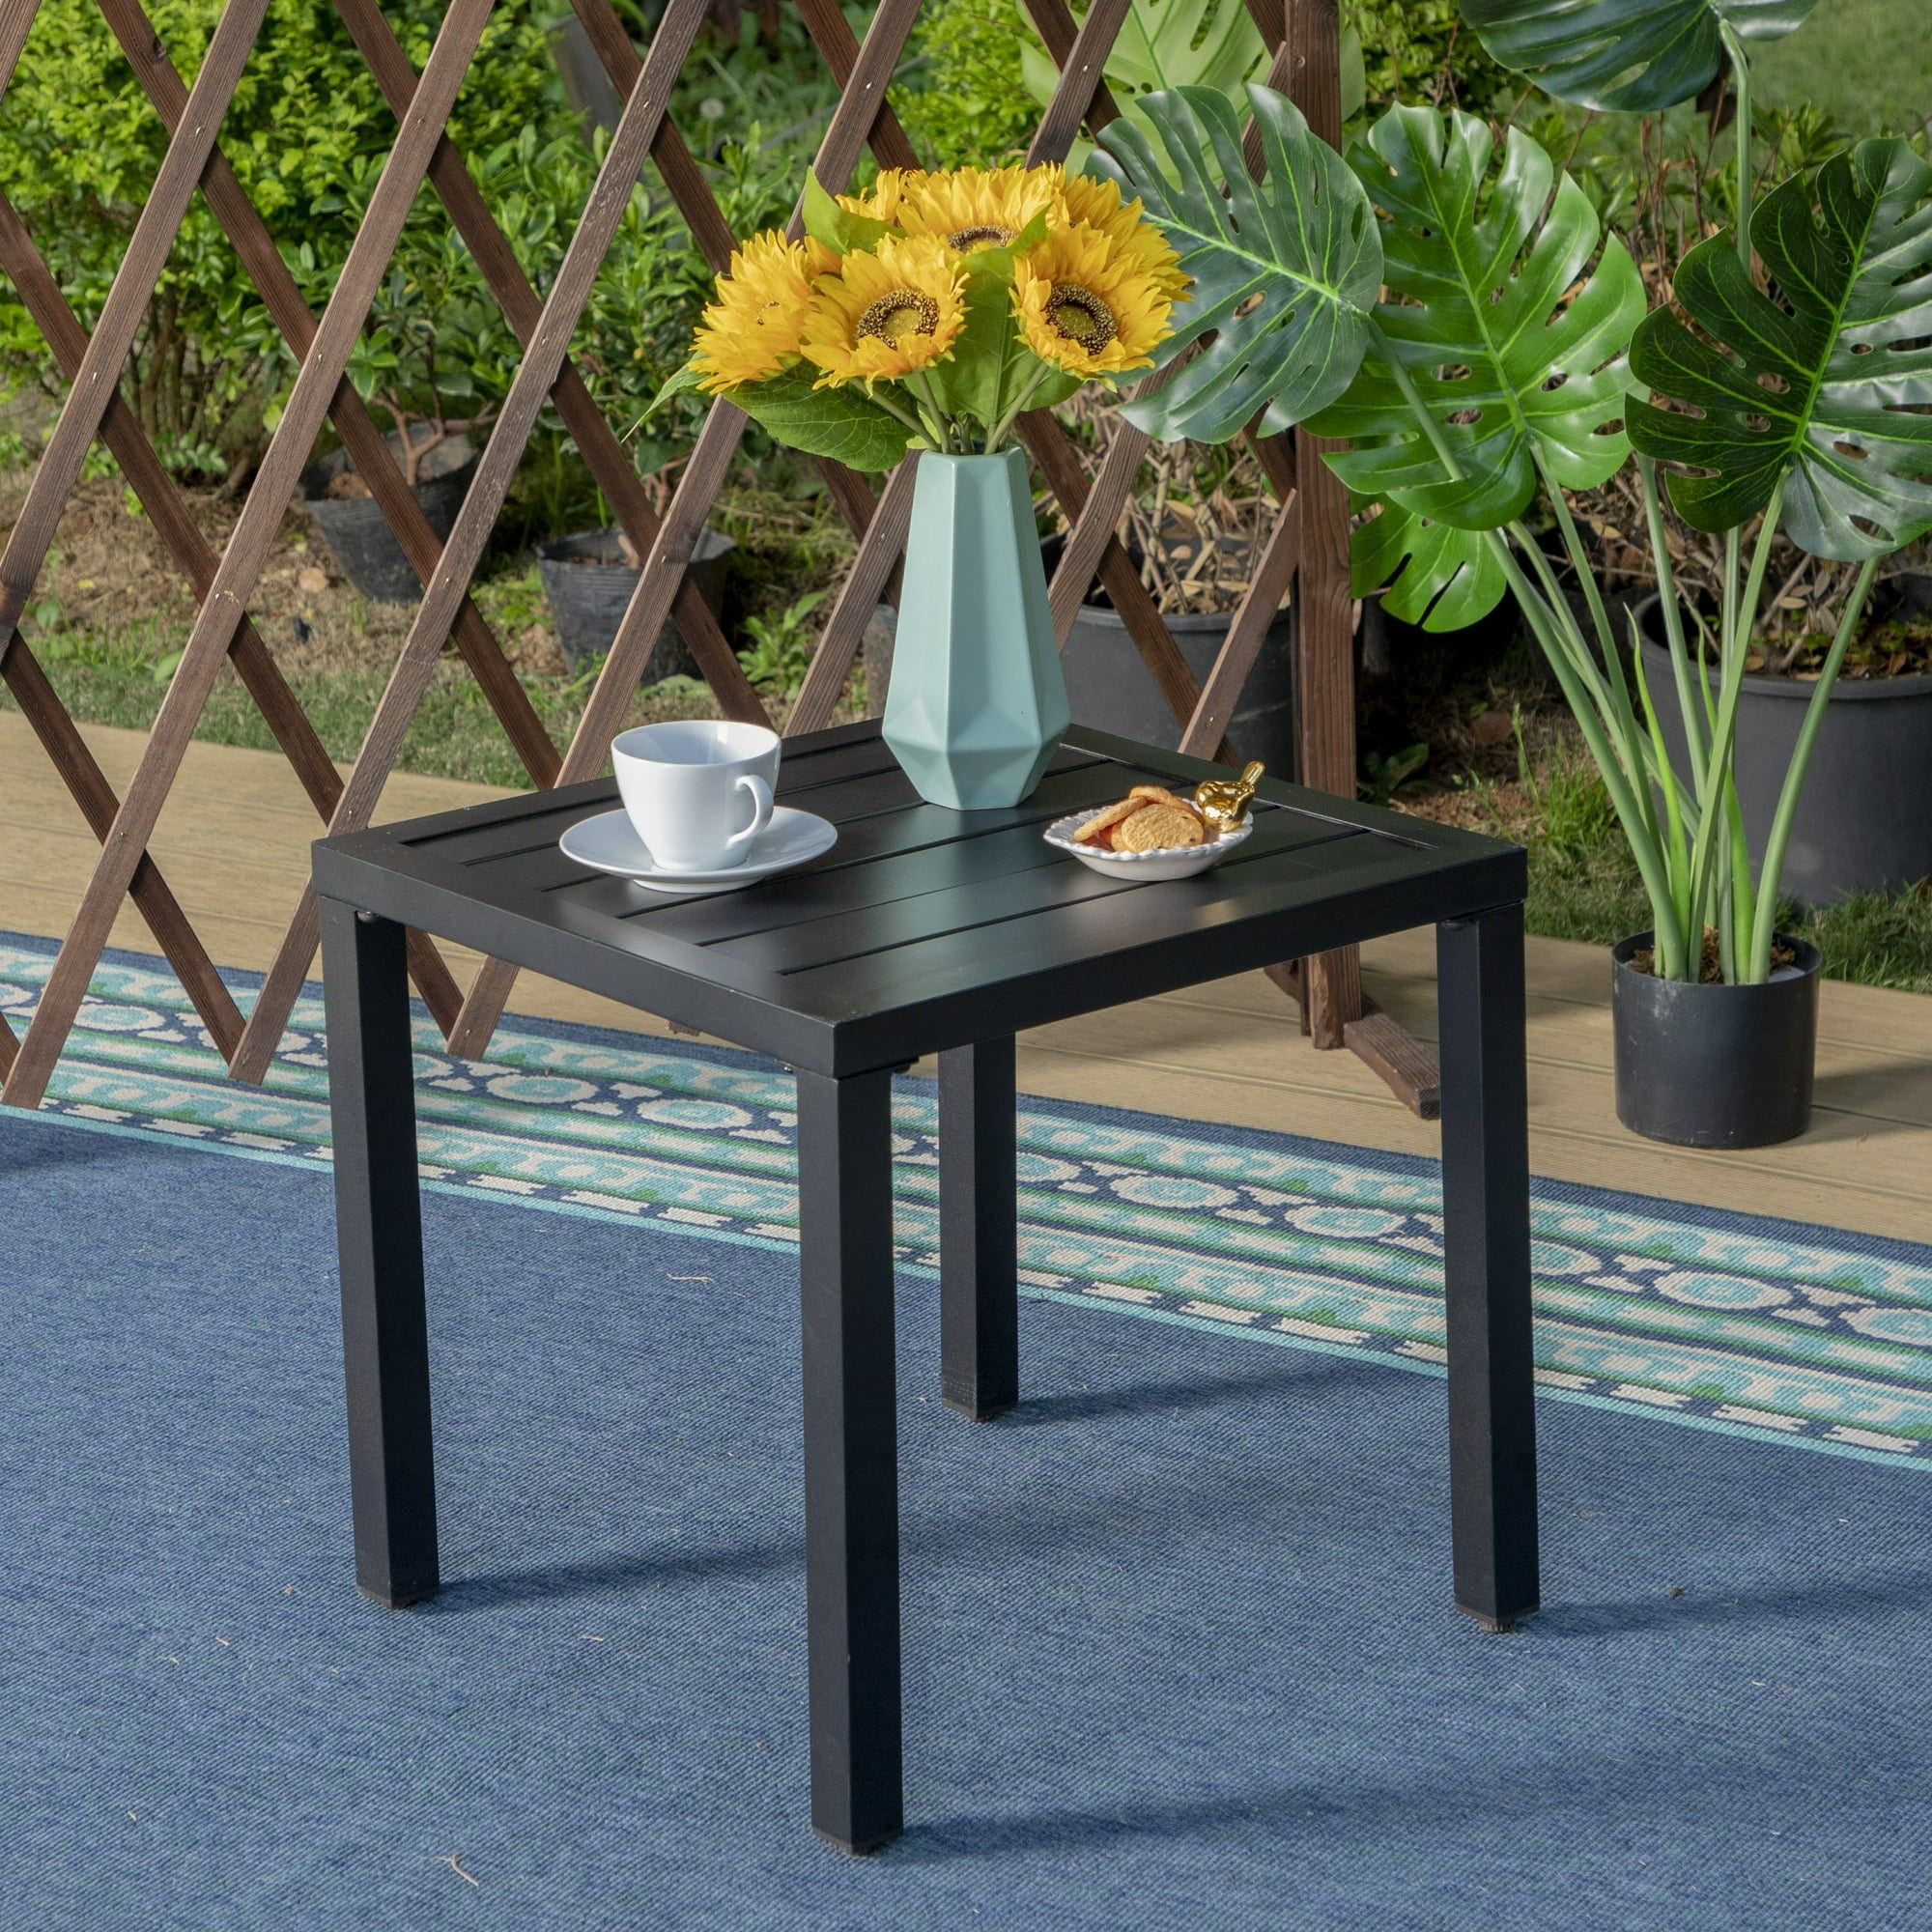 Austiom Leading LLC Outdoor Square Side Table, 18.9 inchD X 18.1 inchH Metal End Table, Black